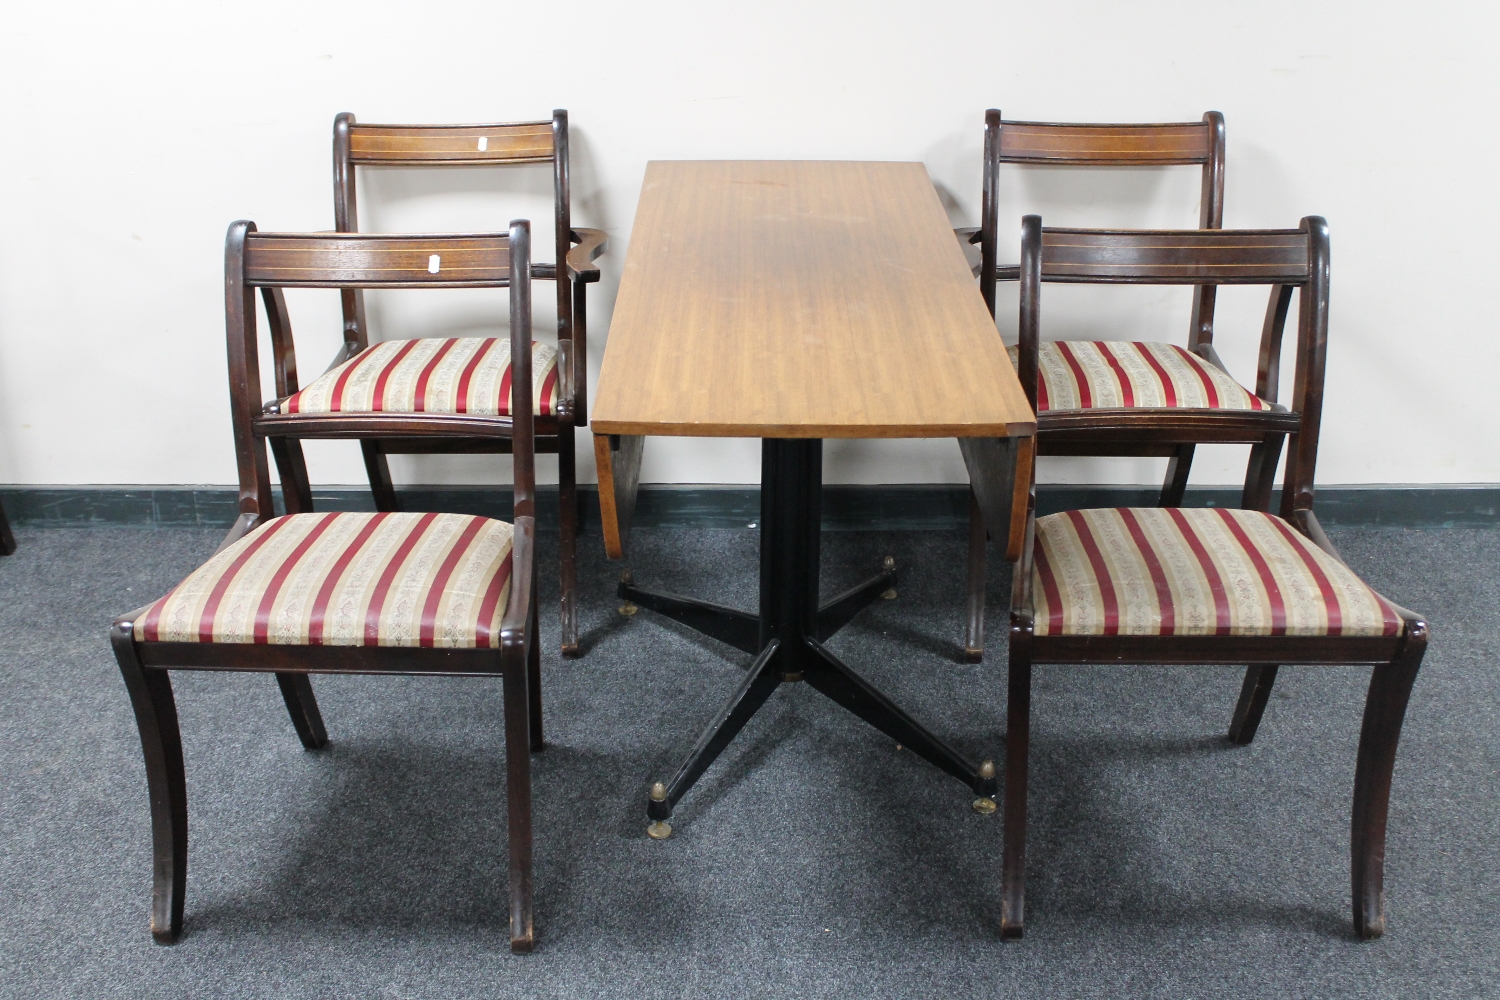 Four Regency style dining chairs and a mid 20th century teak rise and fall pedestal table